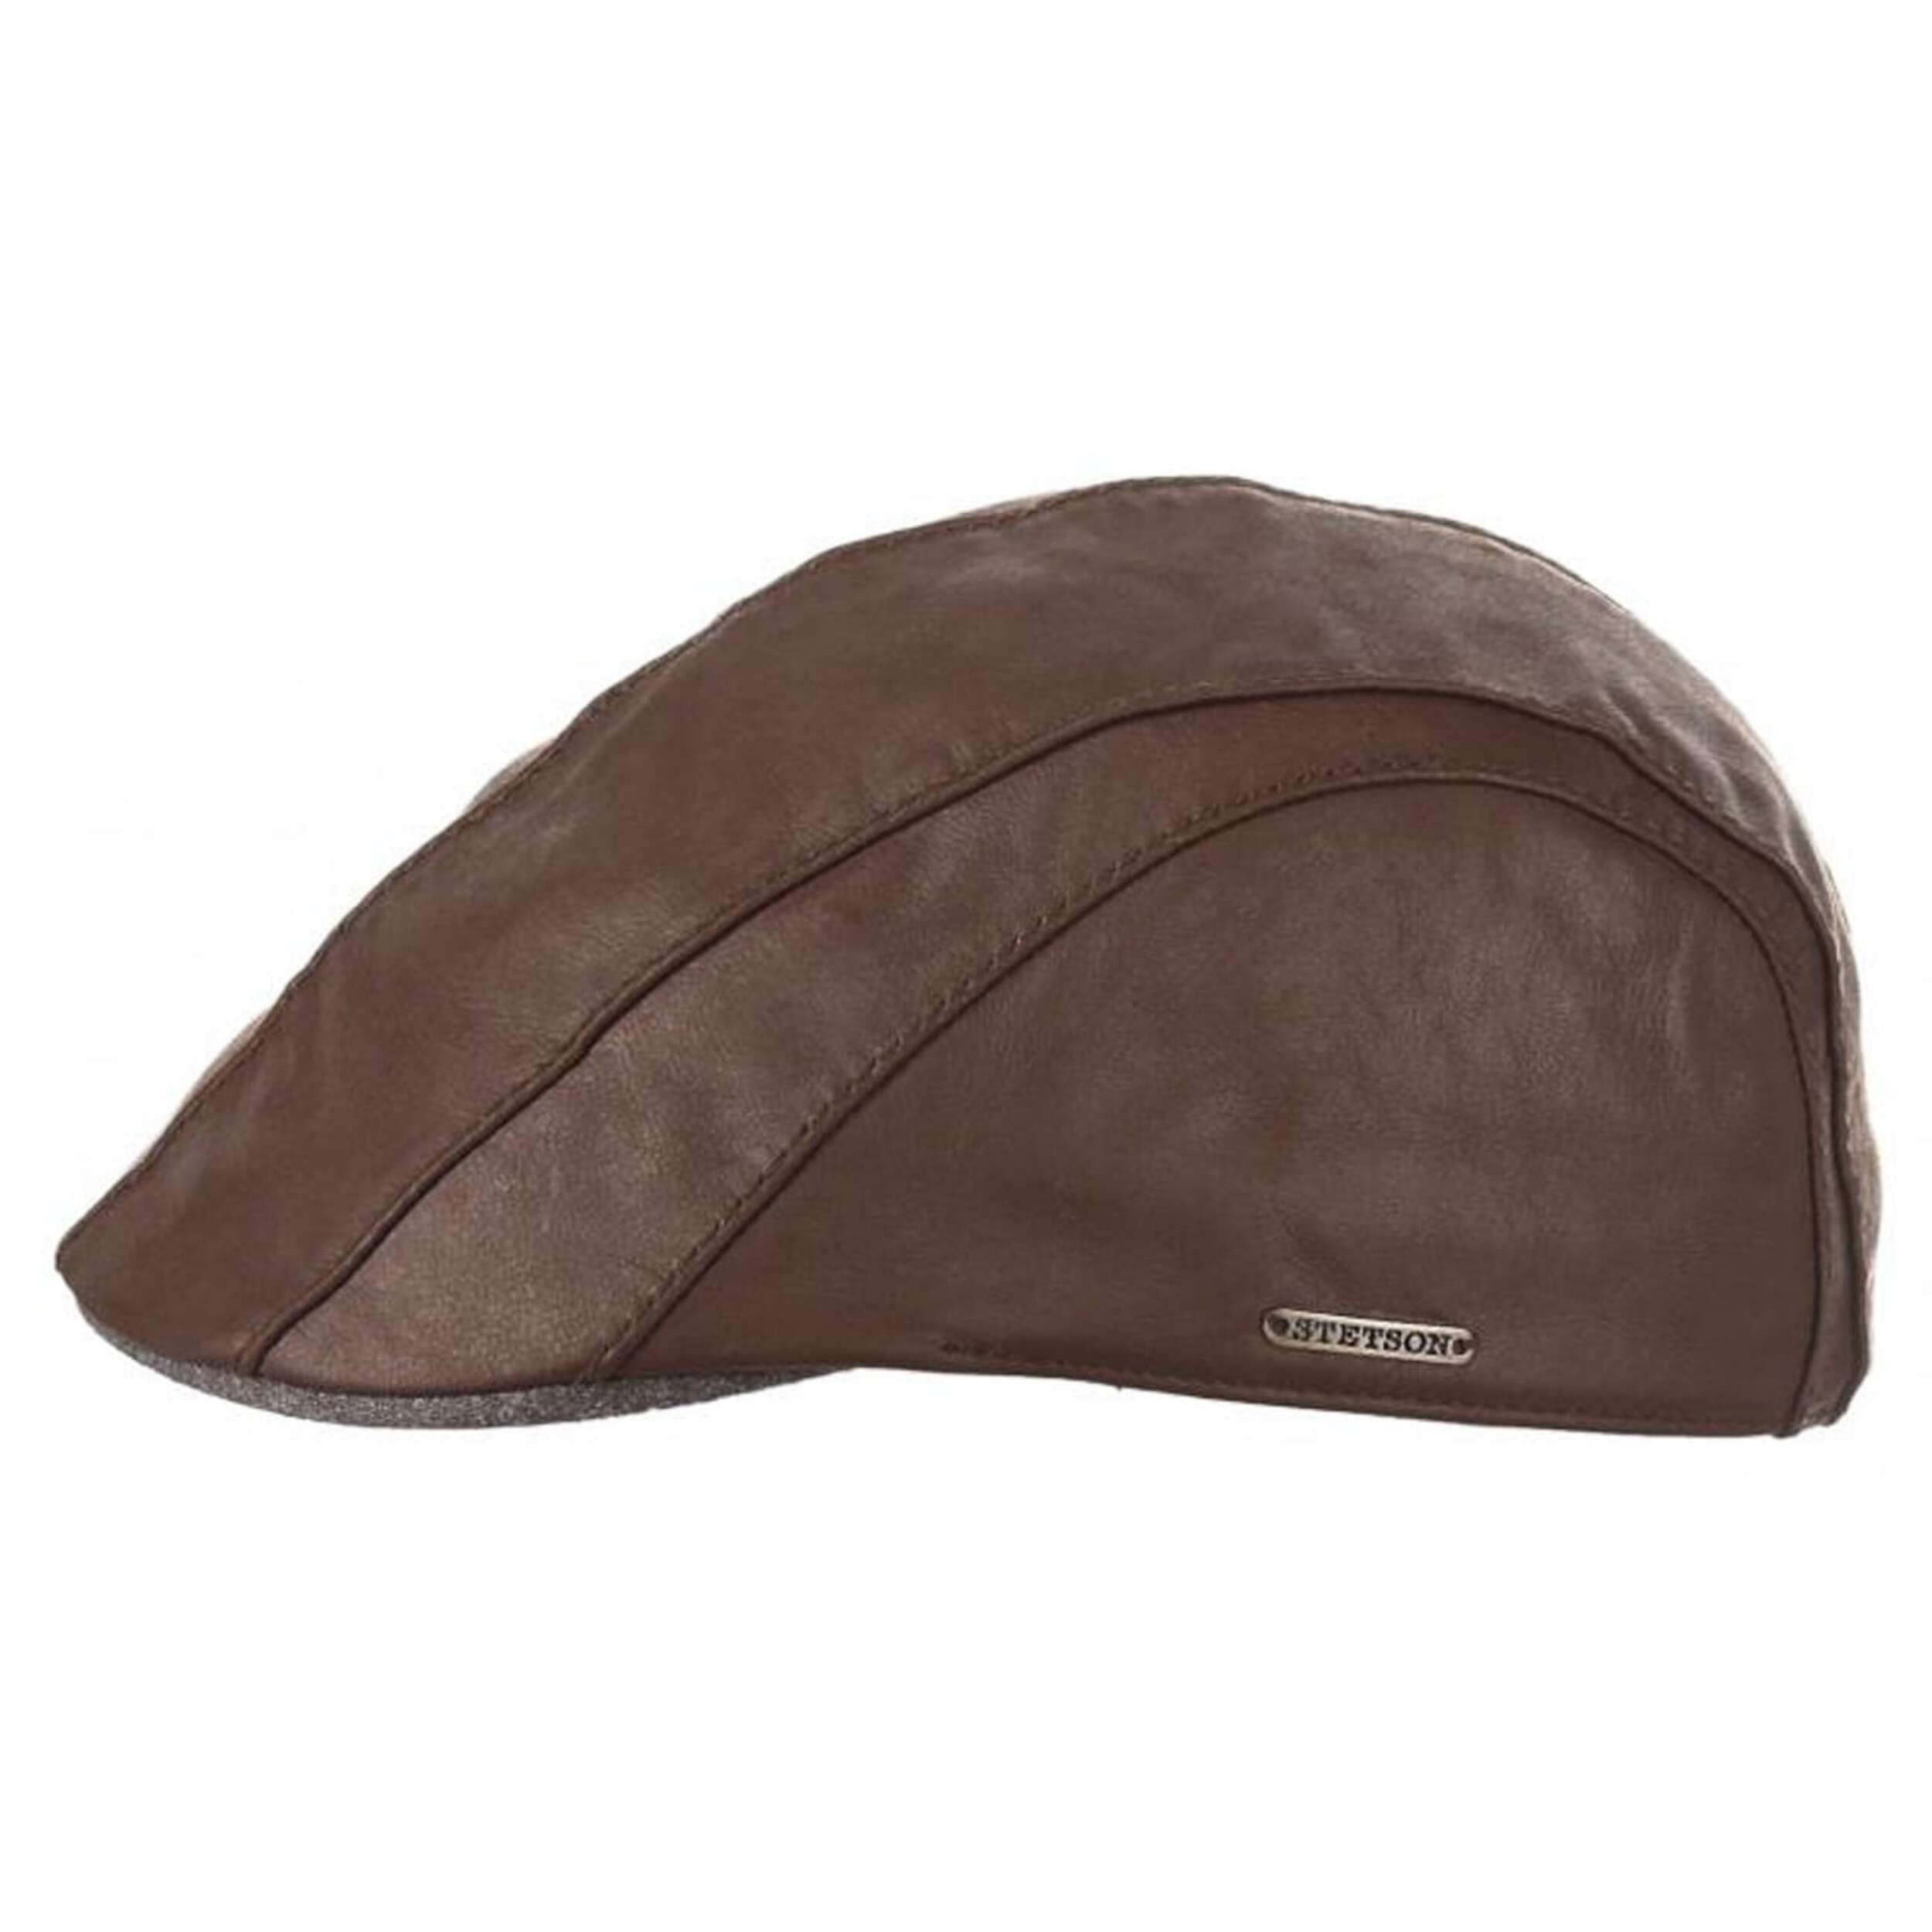 Manatee Gatsby Leather Cap by Stetson - 79,00